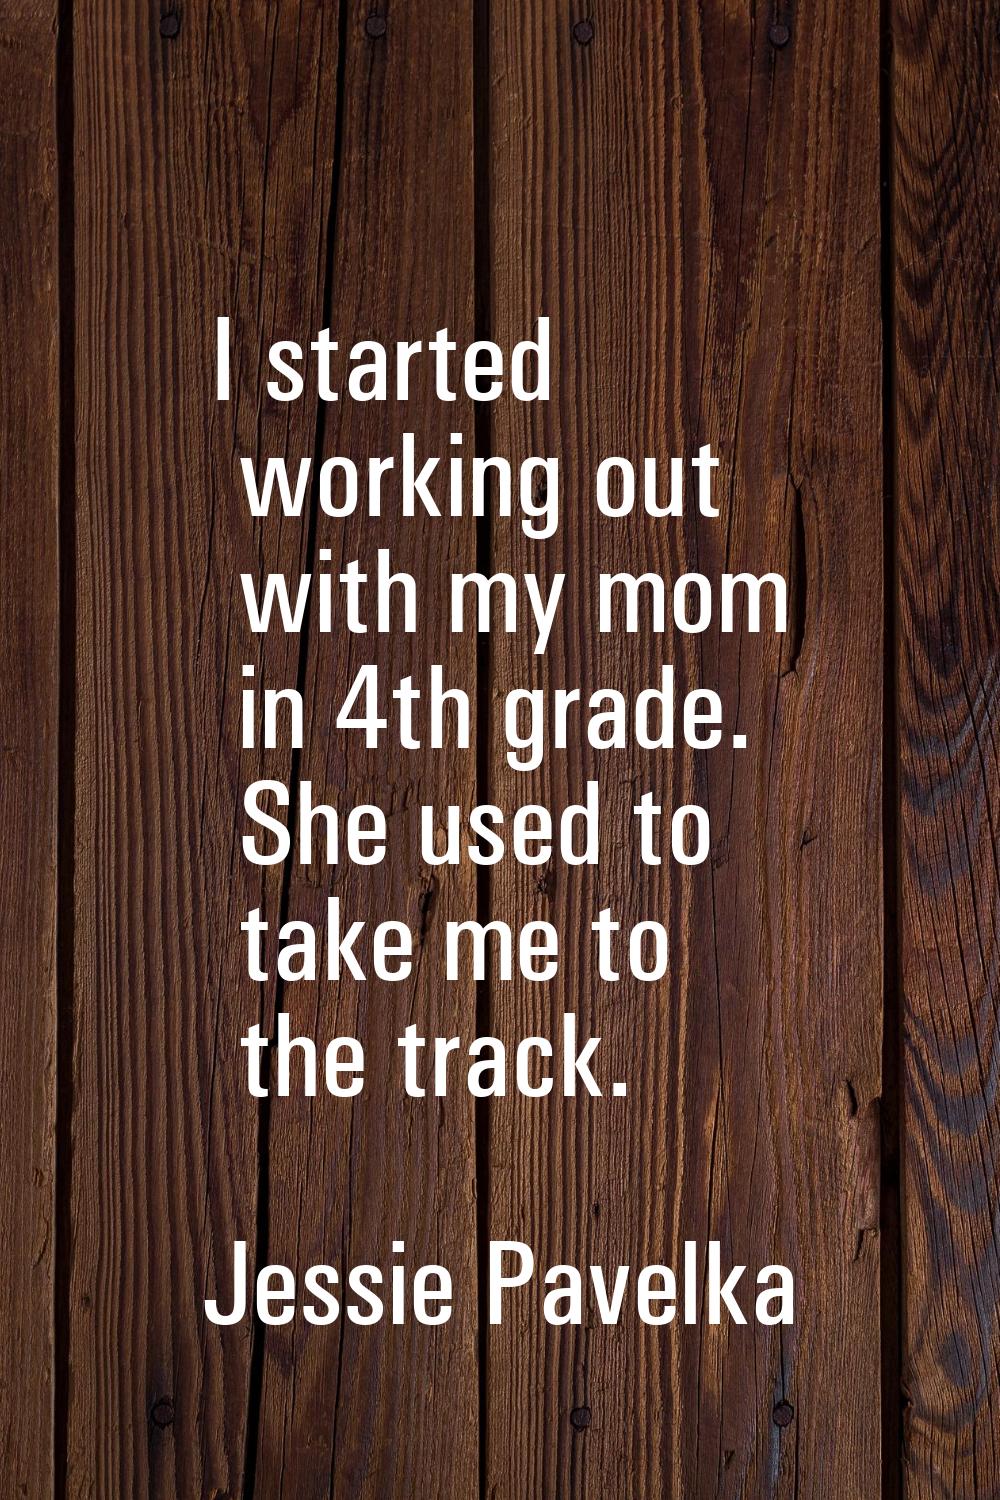 I started working out with my mom in 4th grade. She used to take me to the track.